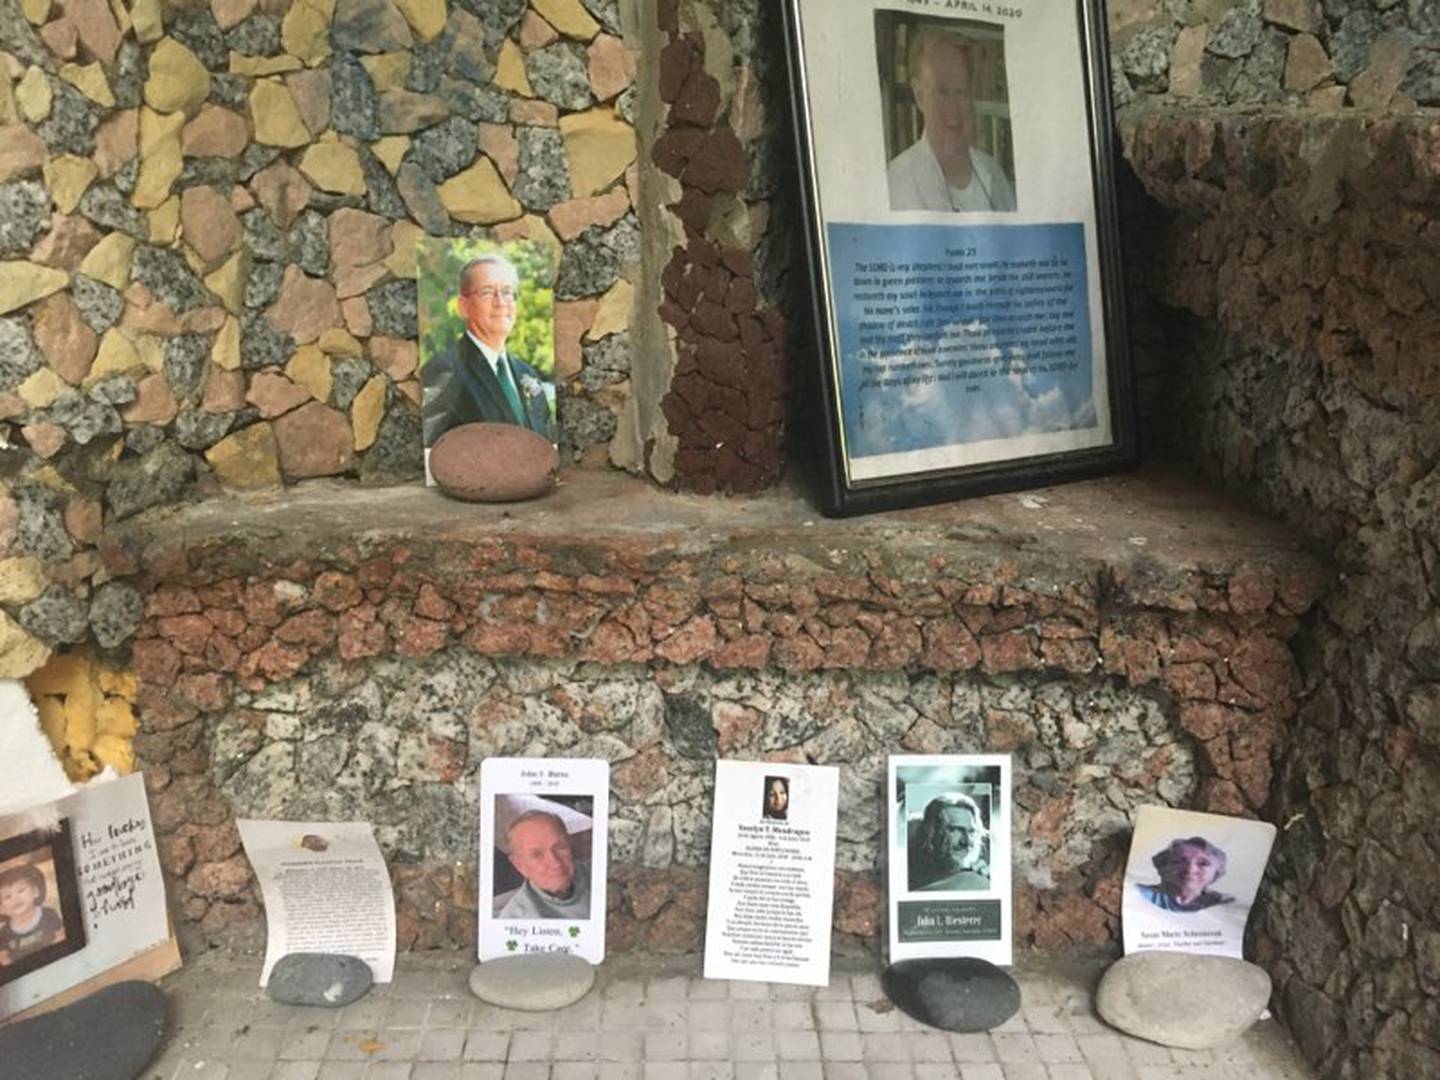 People leave memorials to loved ones at the Grotto Shrine behind the Kane County Government Center. Bob McQuillan will lead tours to the Grotto during the Geneva Arts Fair July 23 and 24, from a religious art display and sale at The Catholic Corner, 4 S. Sixth St., Geneva.